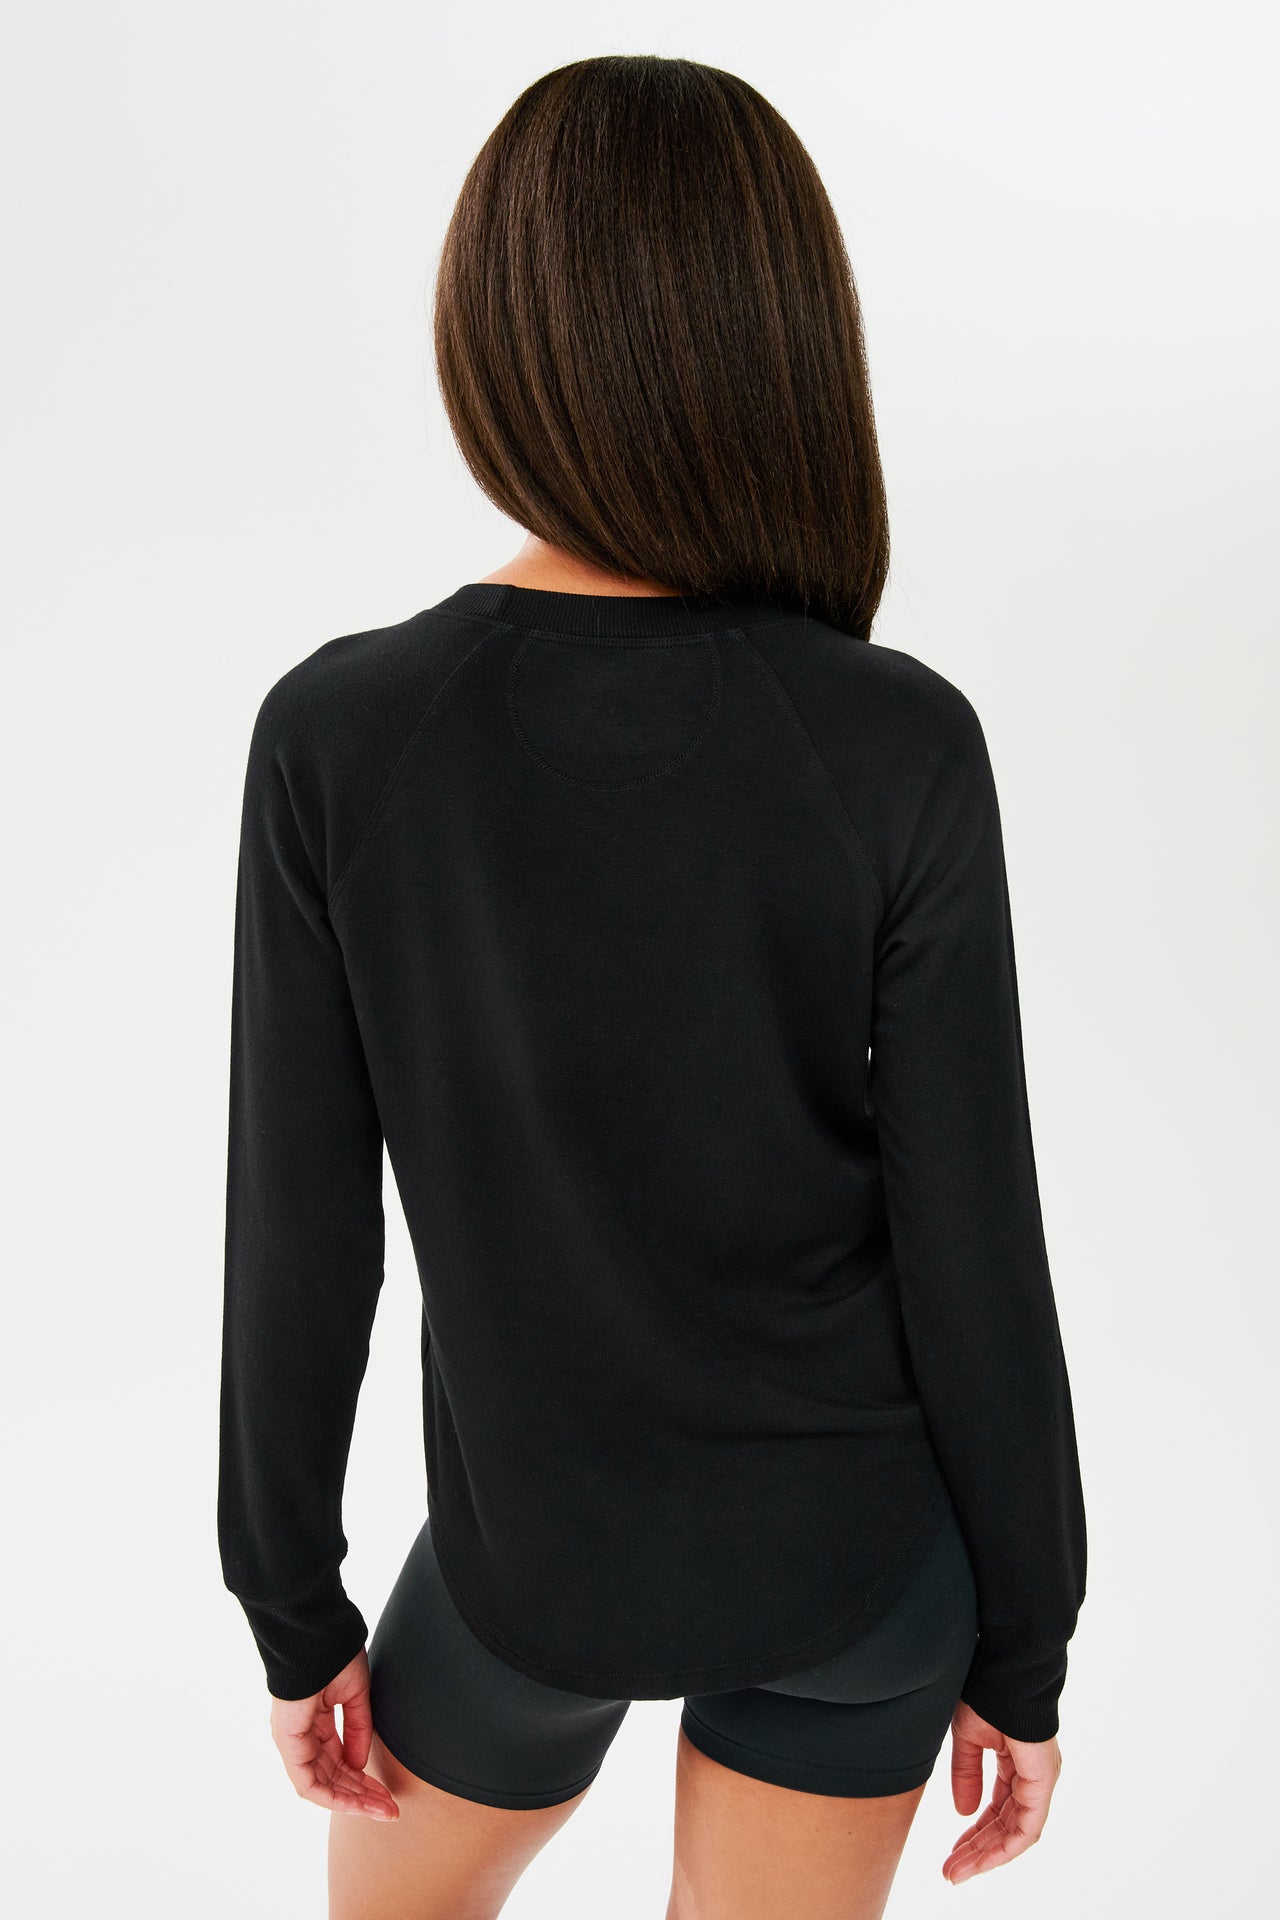 Back side shot of woman with dark straight hair, wearing black sweatshirt with black shorts